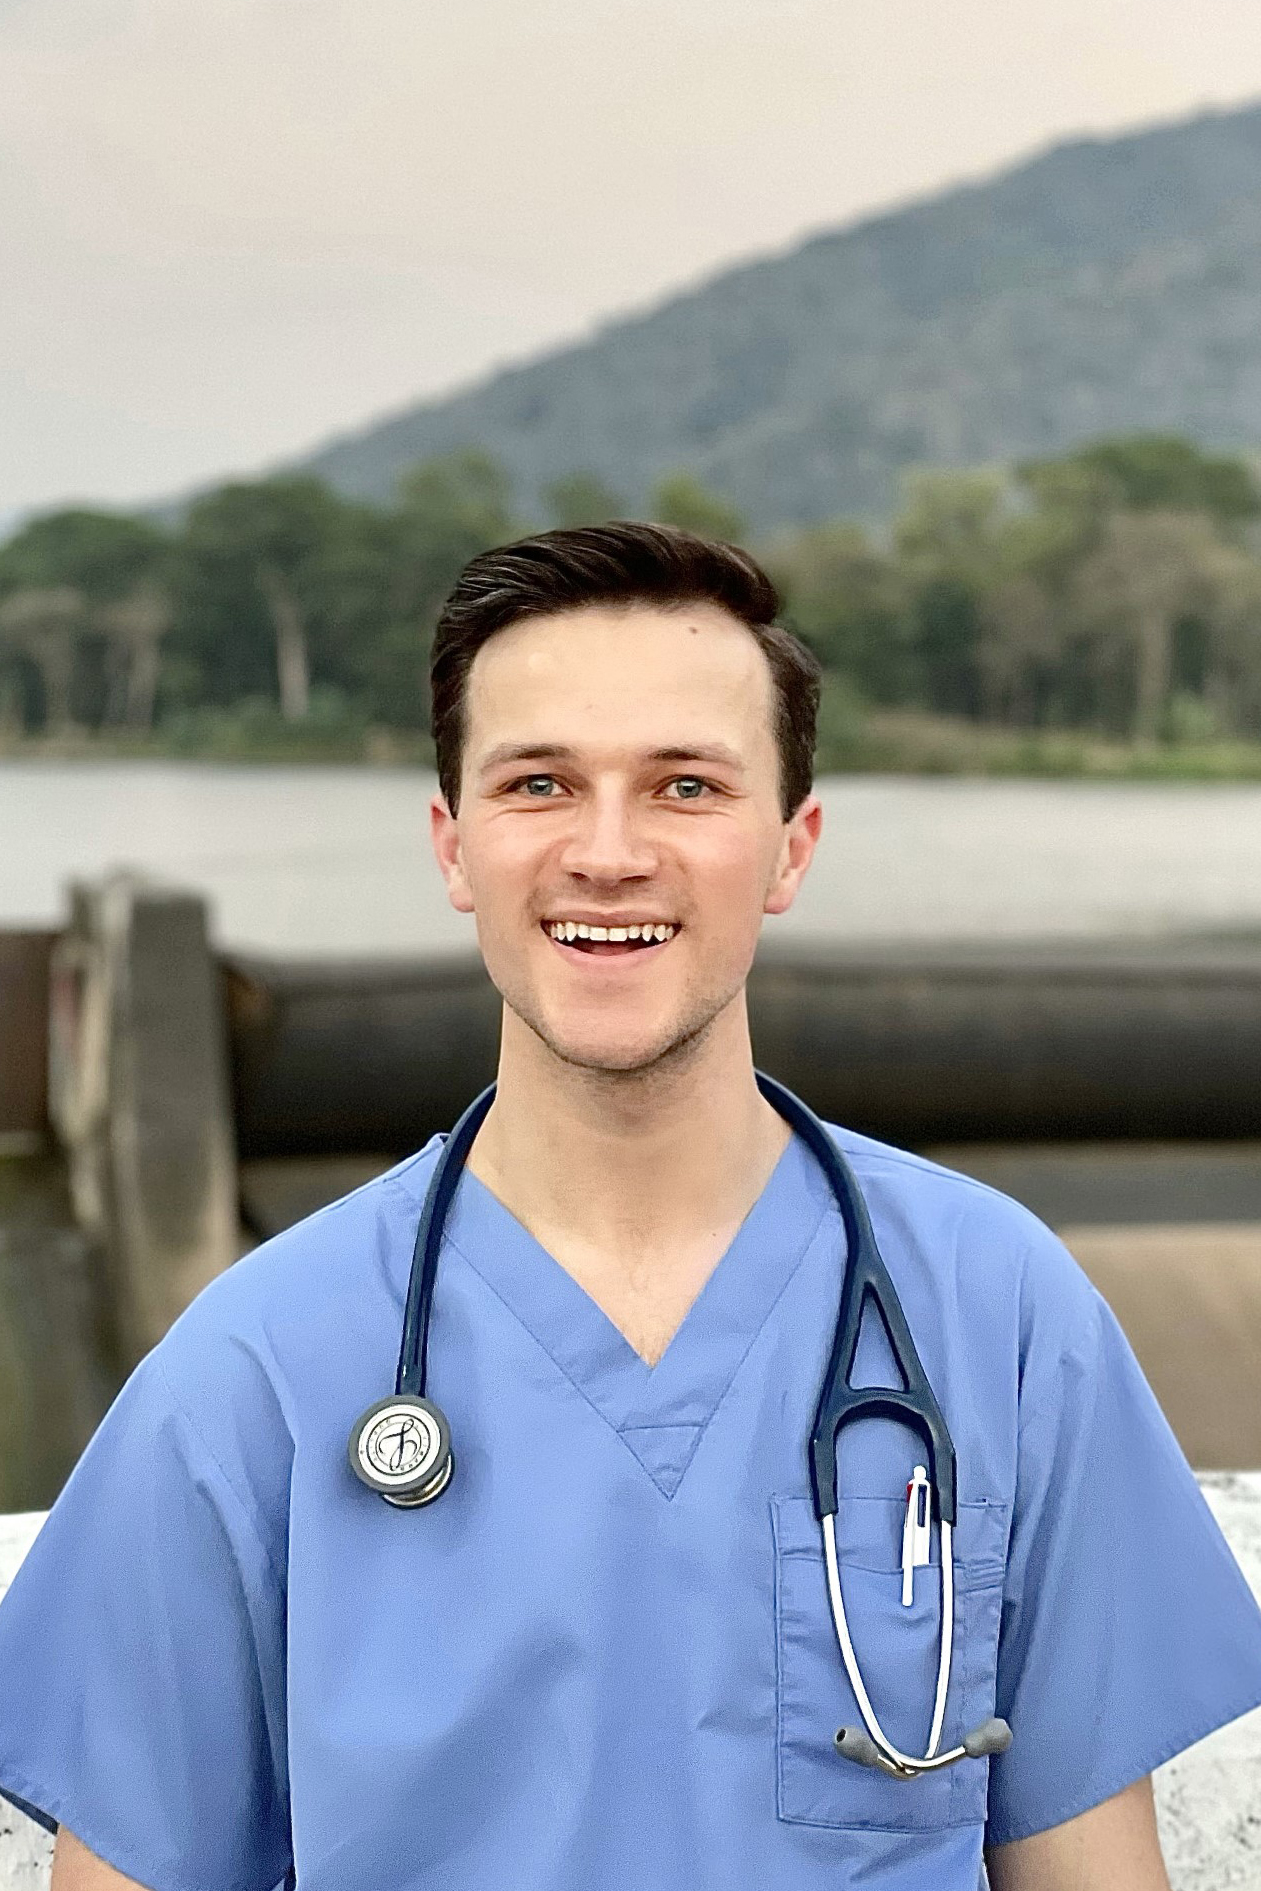 Smiling man with short, dark hair, wearing scrubs and a stethoscope, with lake and mountains in the background.